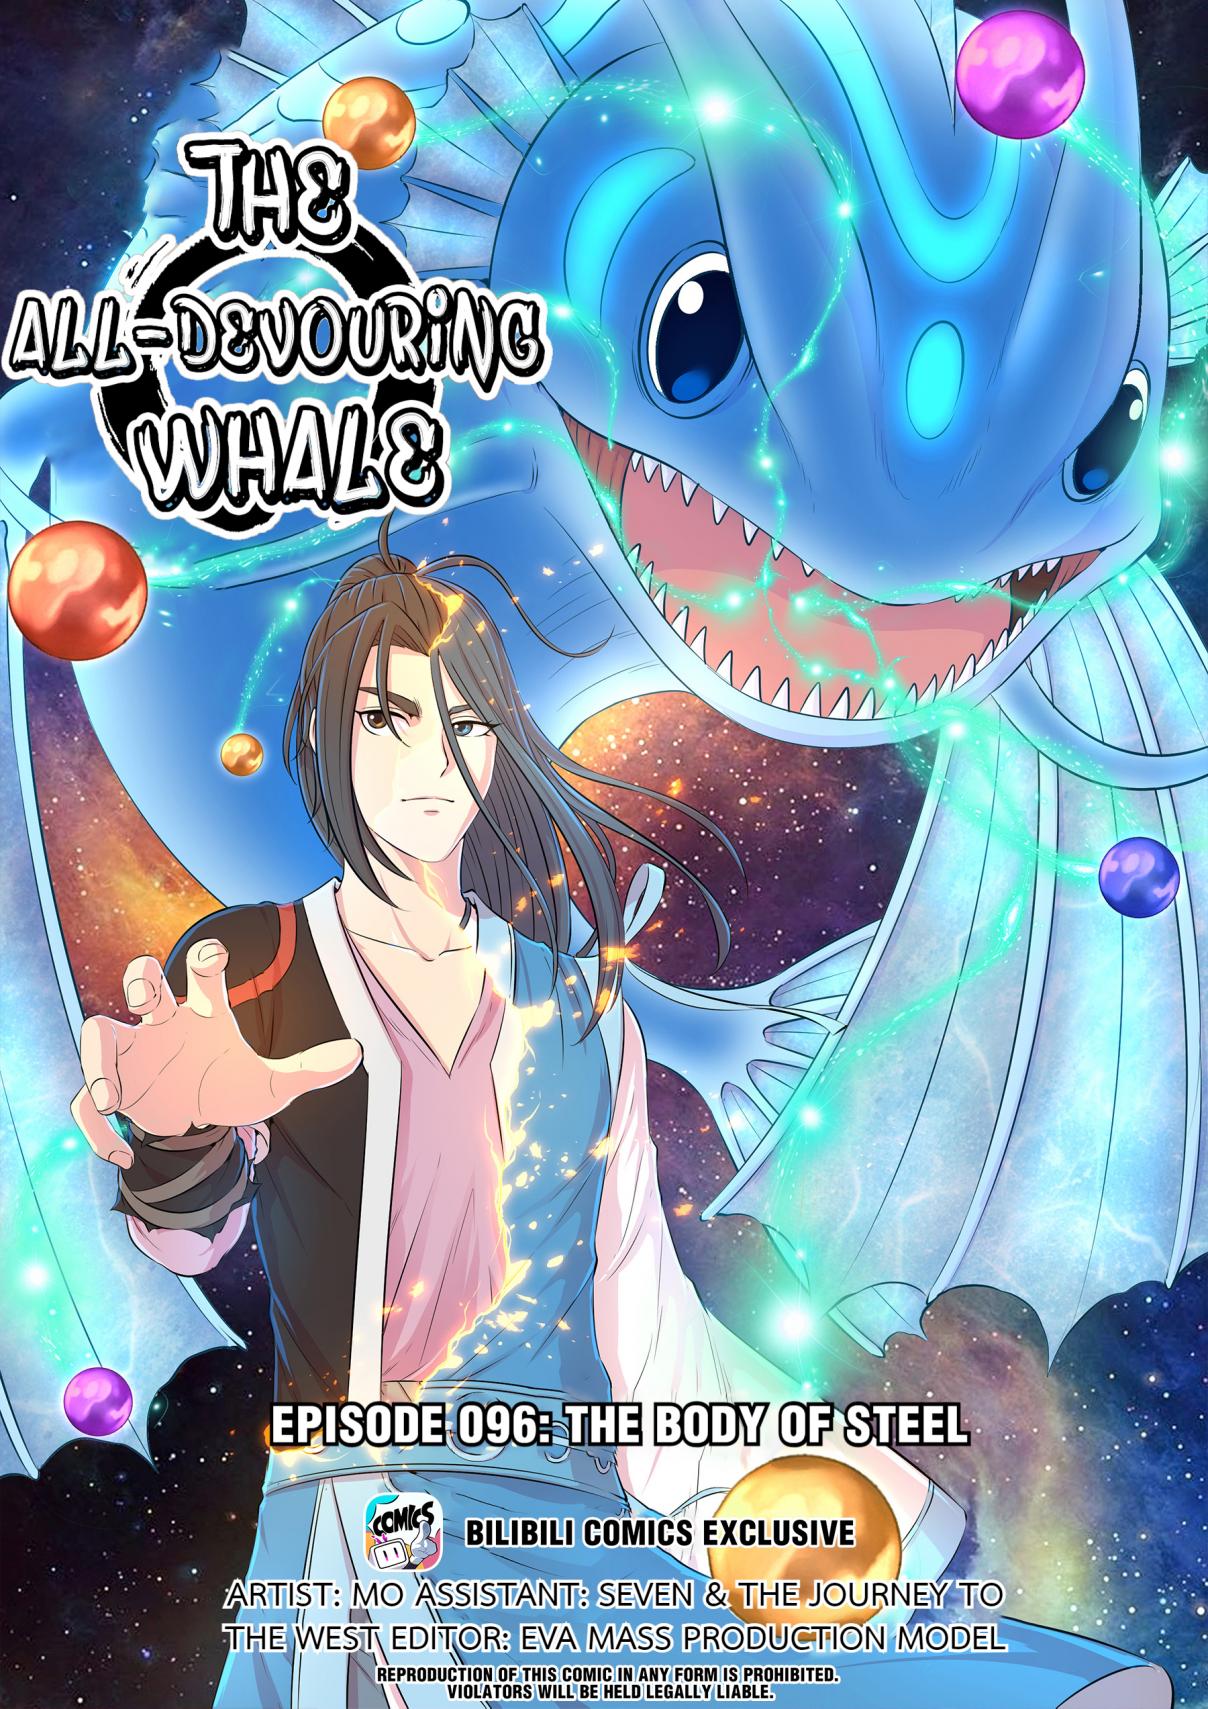 The All-devouring Whale 101.1 The Body Of Steel